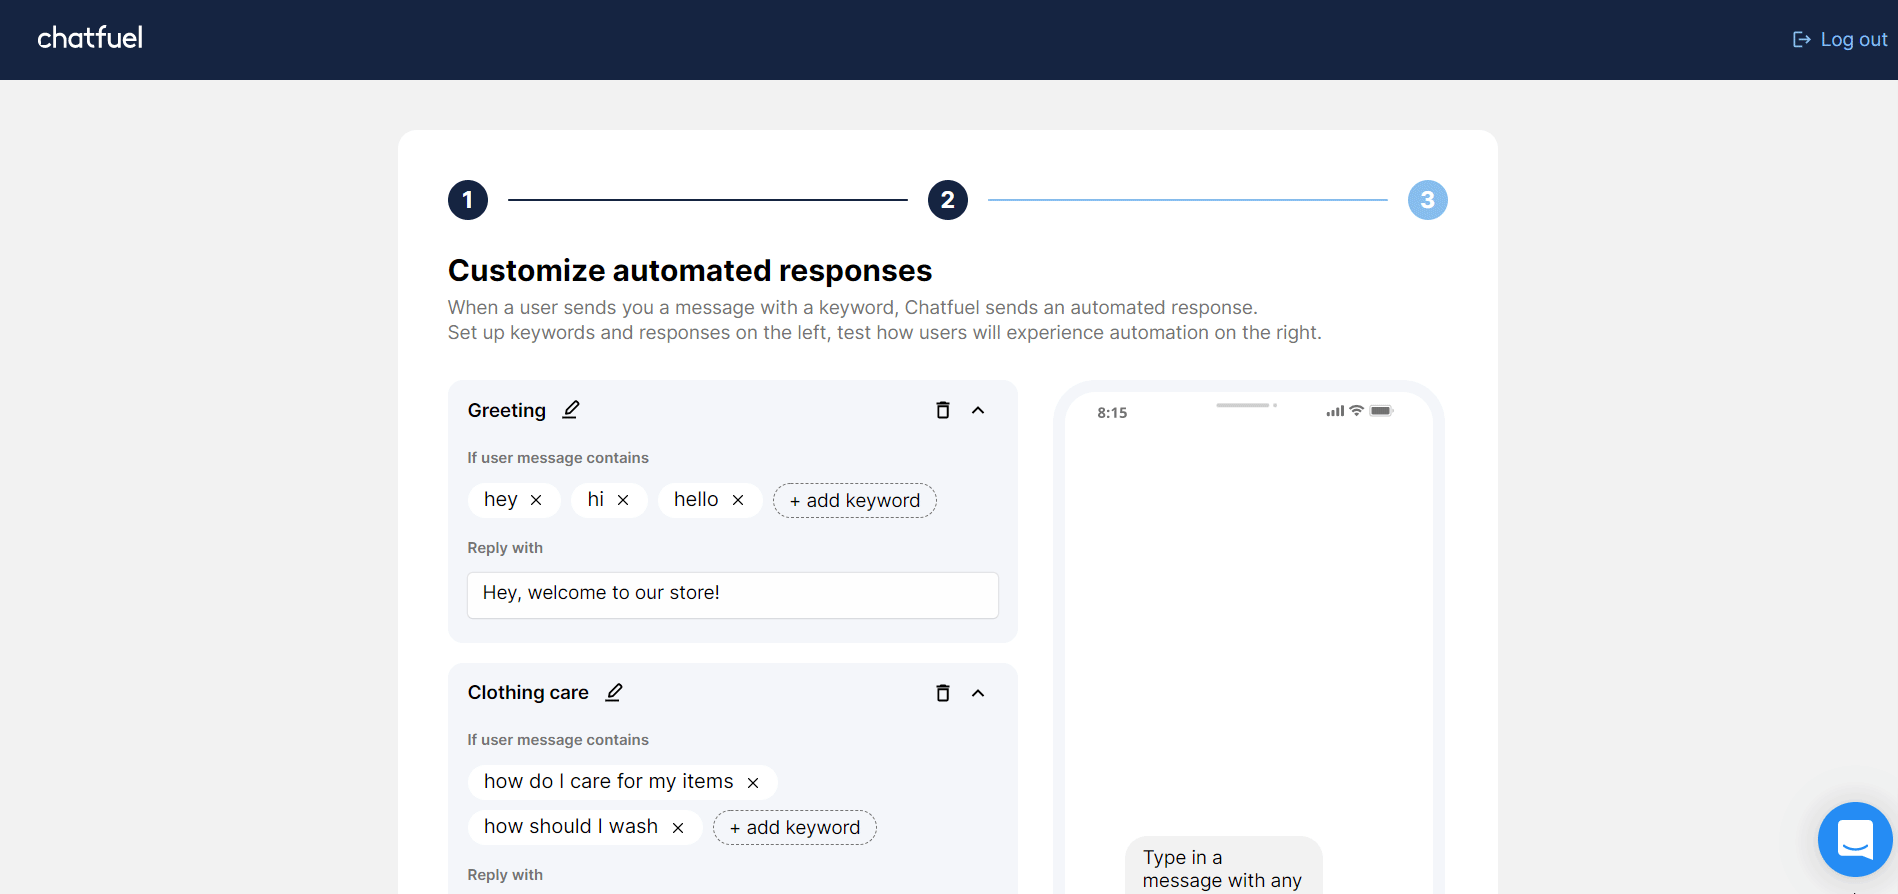 Customize automated responses